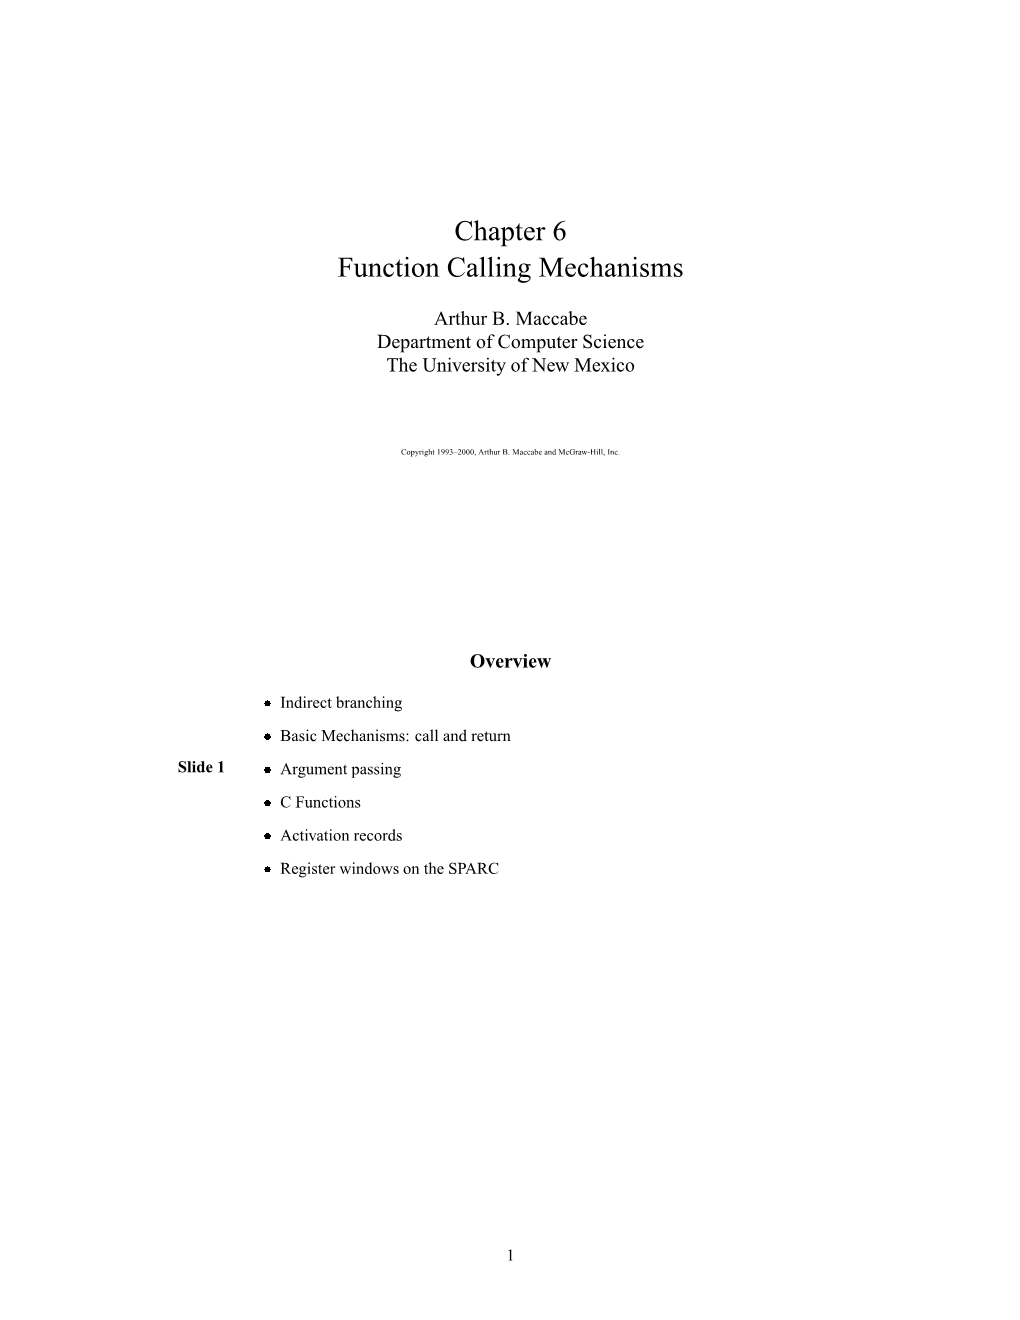 Chapter 6 Function Calling Mechanisms